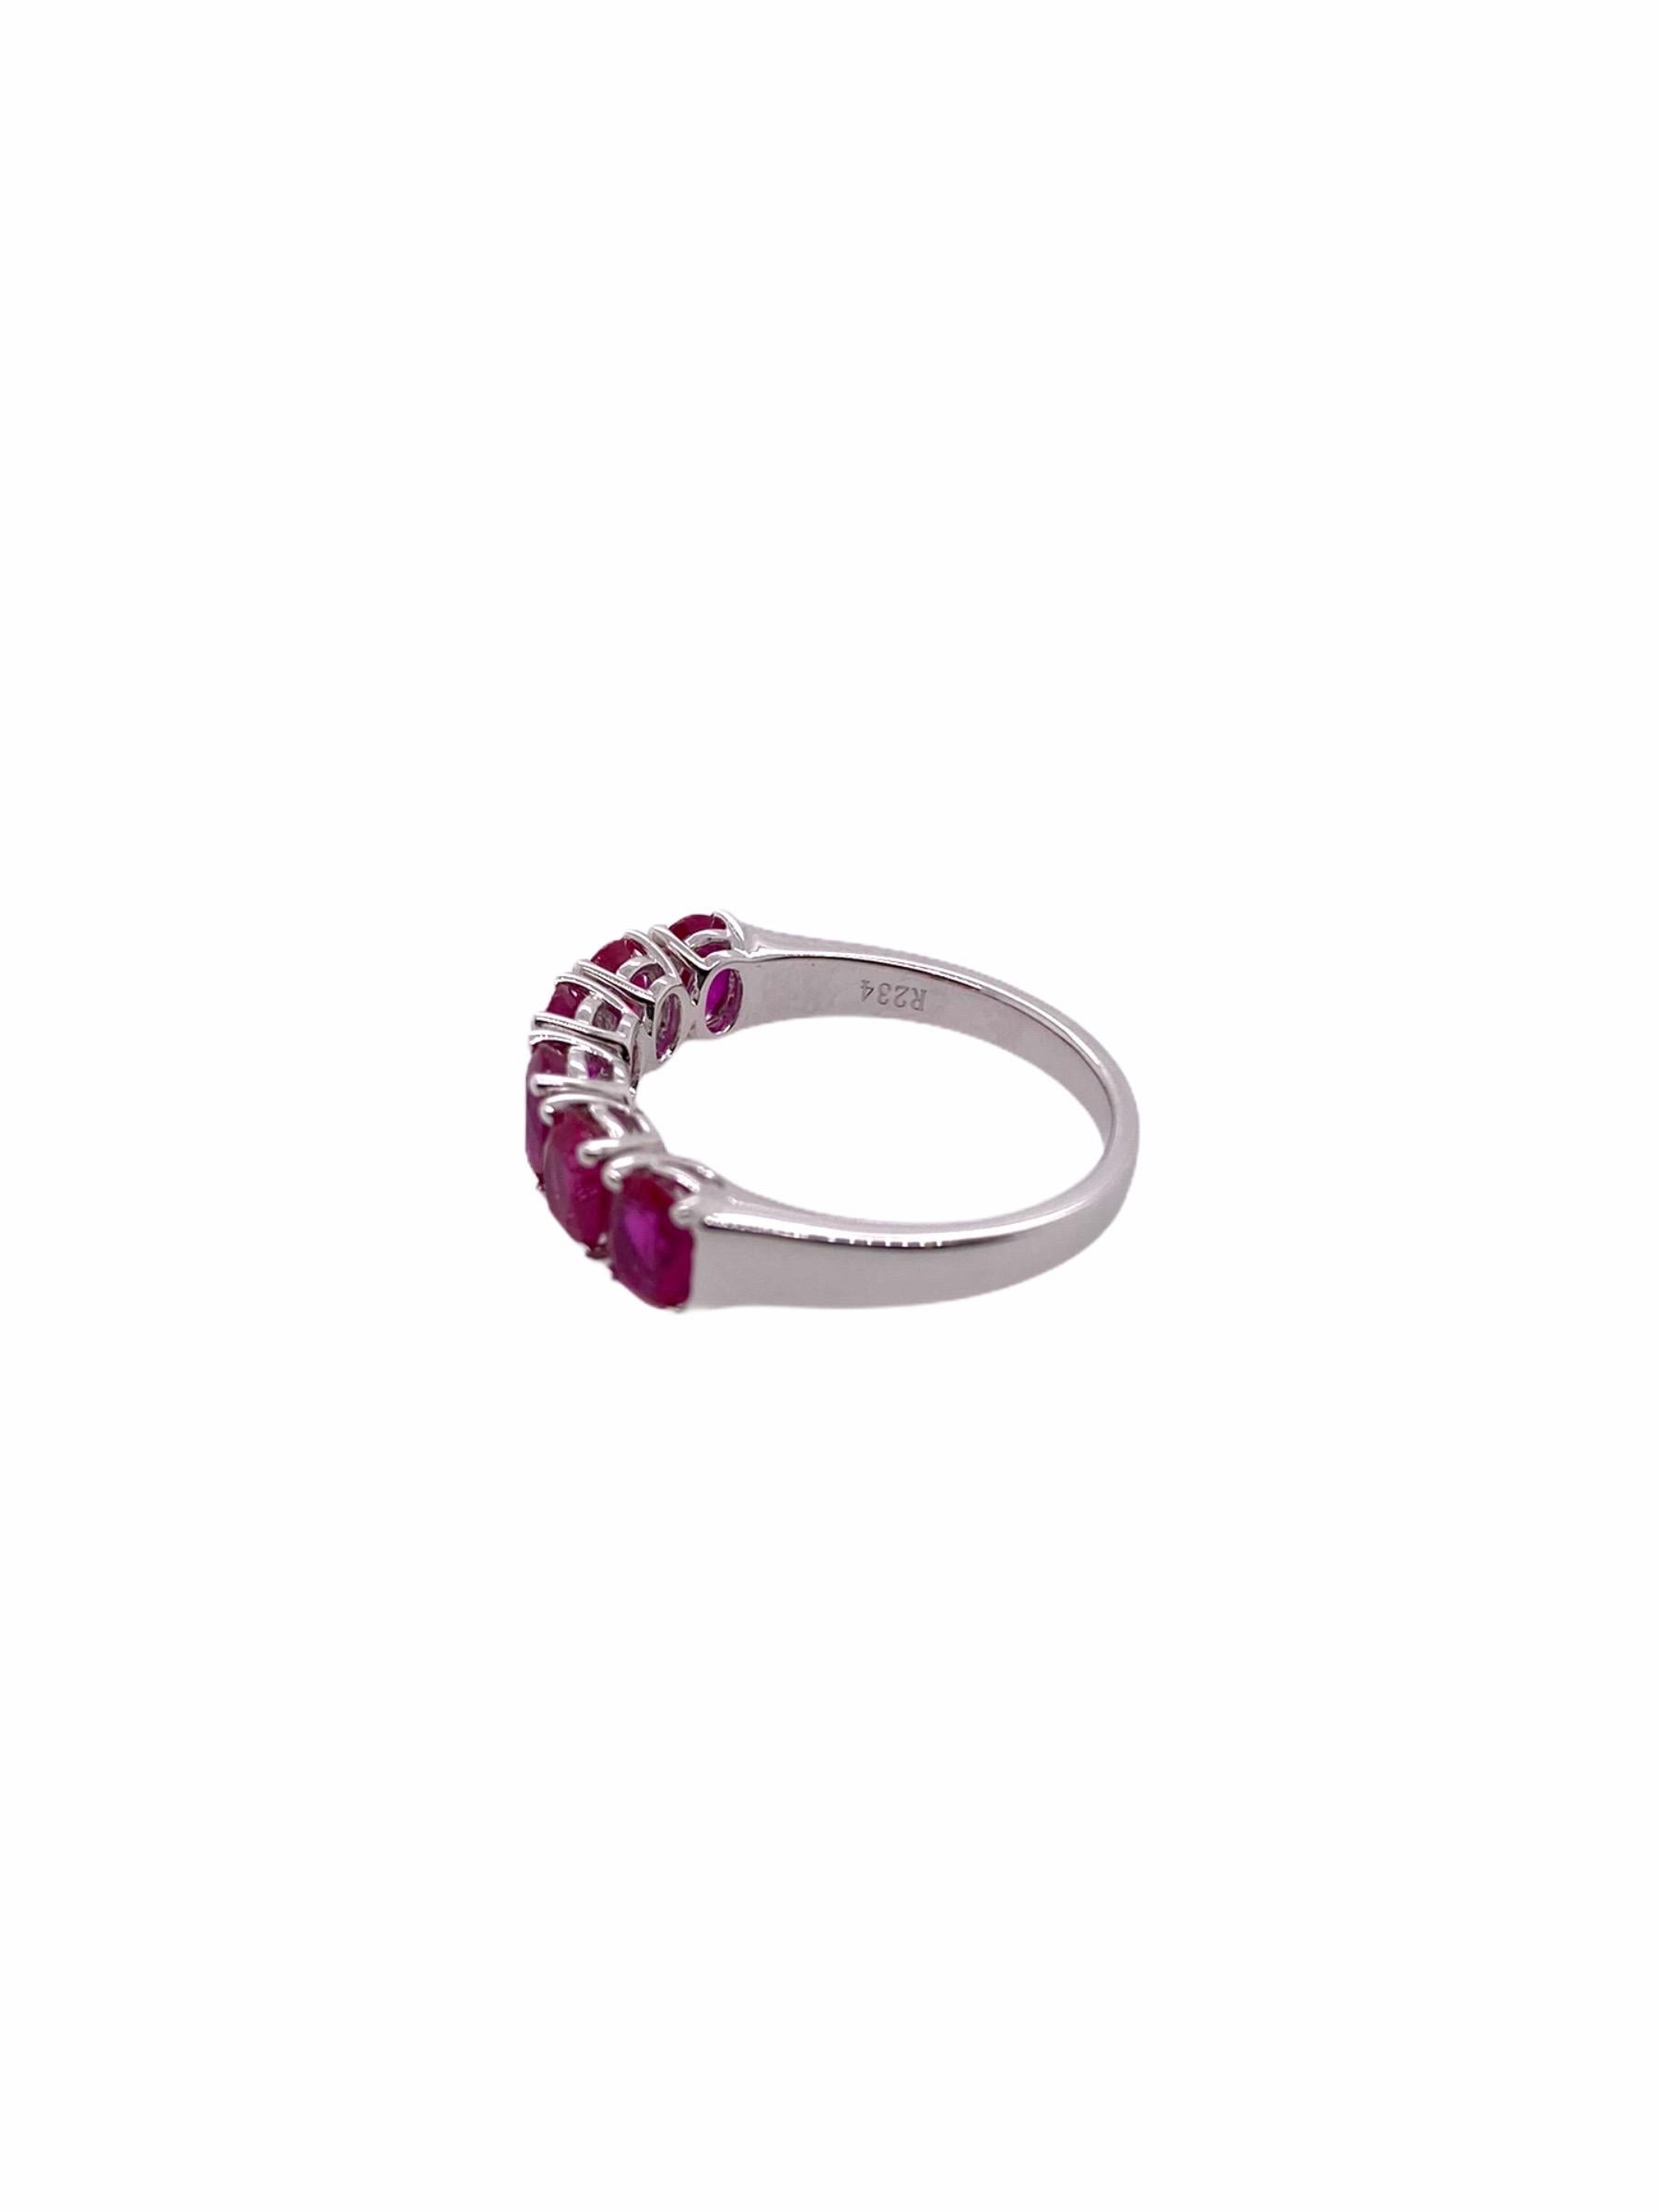 Modern Paris Craft House Oval Ruby Ring in 18 Karat White Gold For Sale